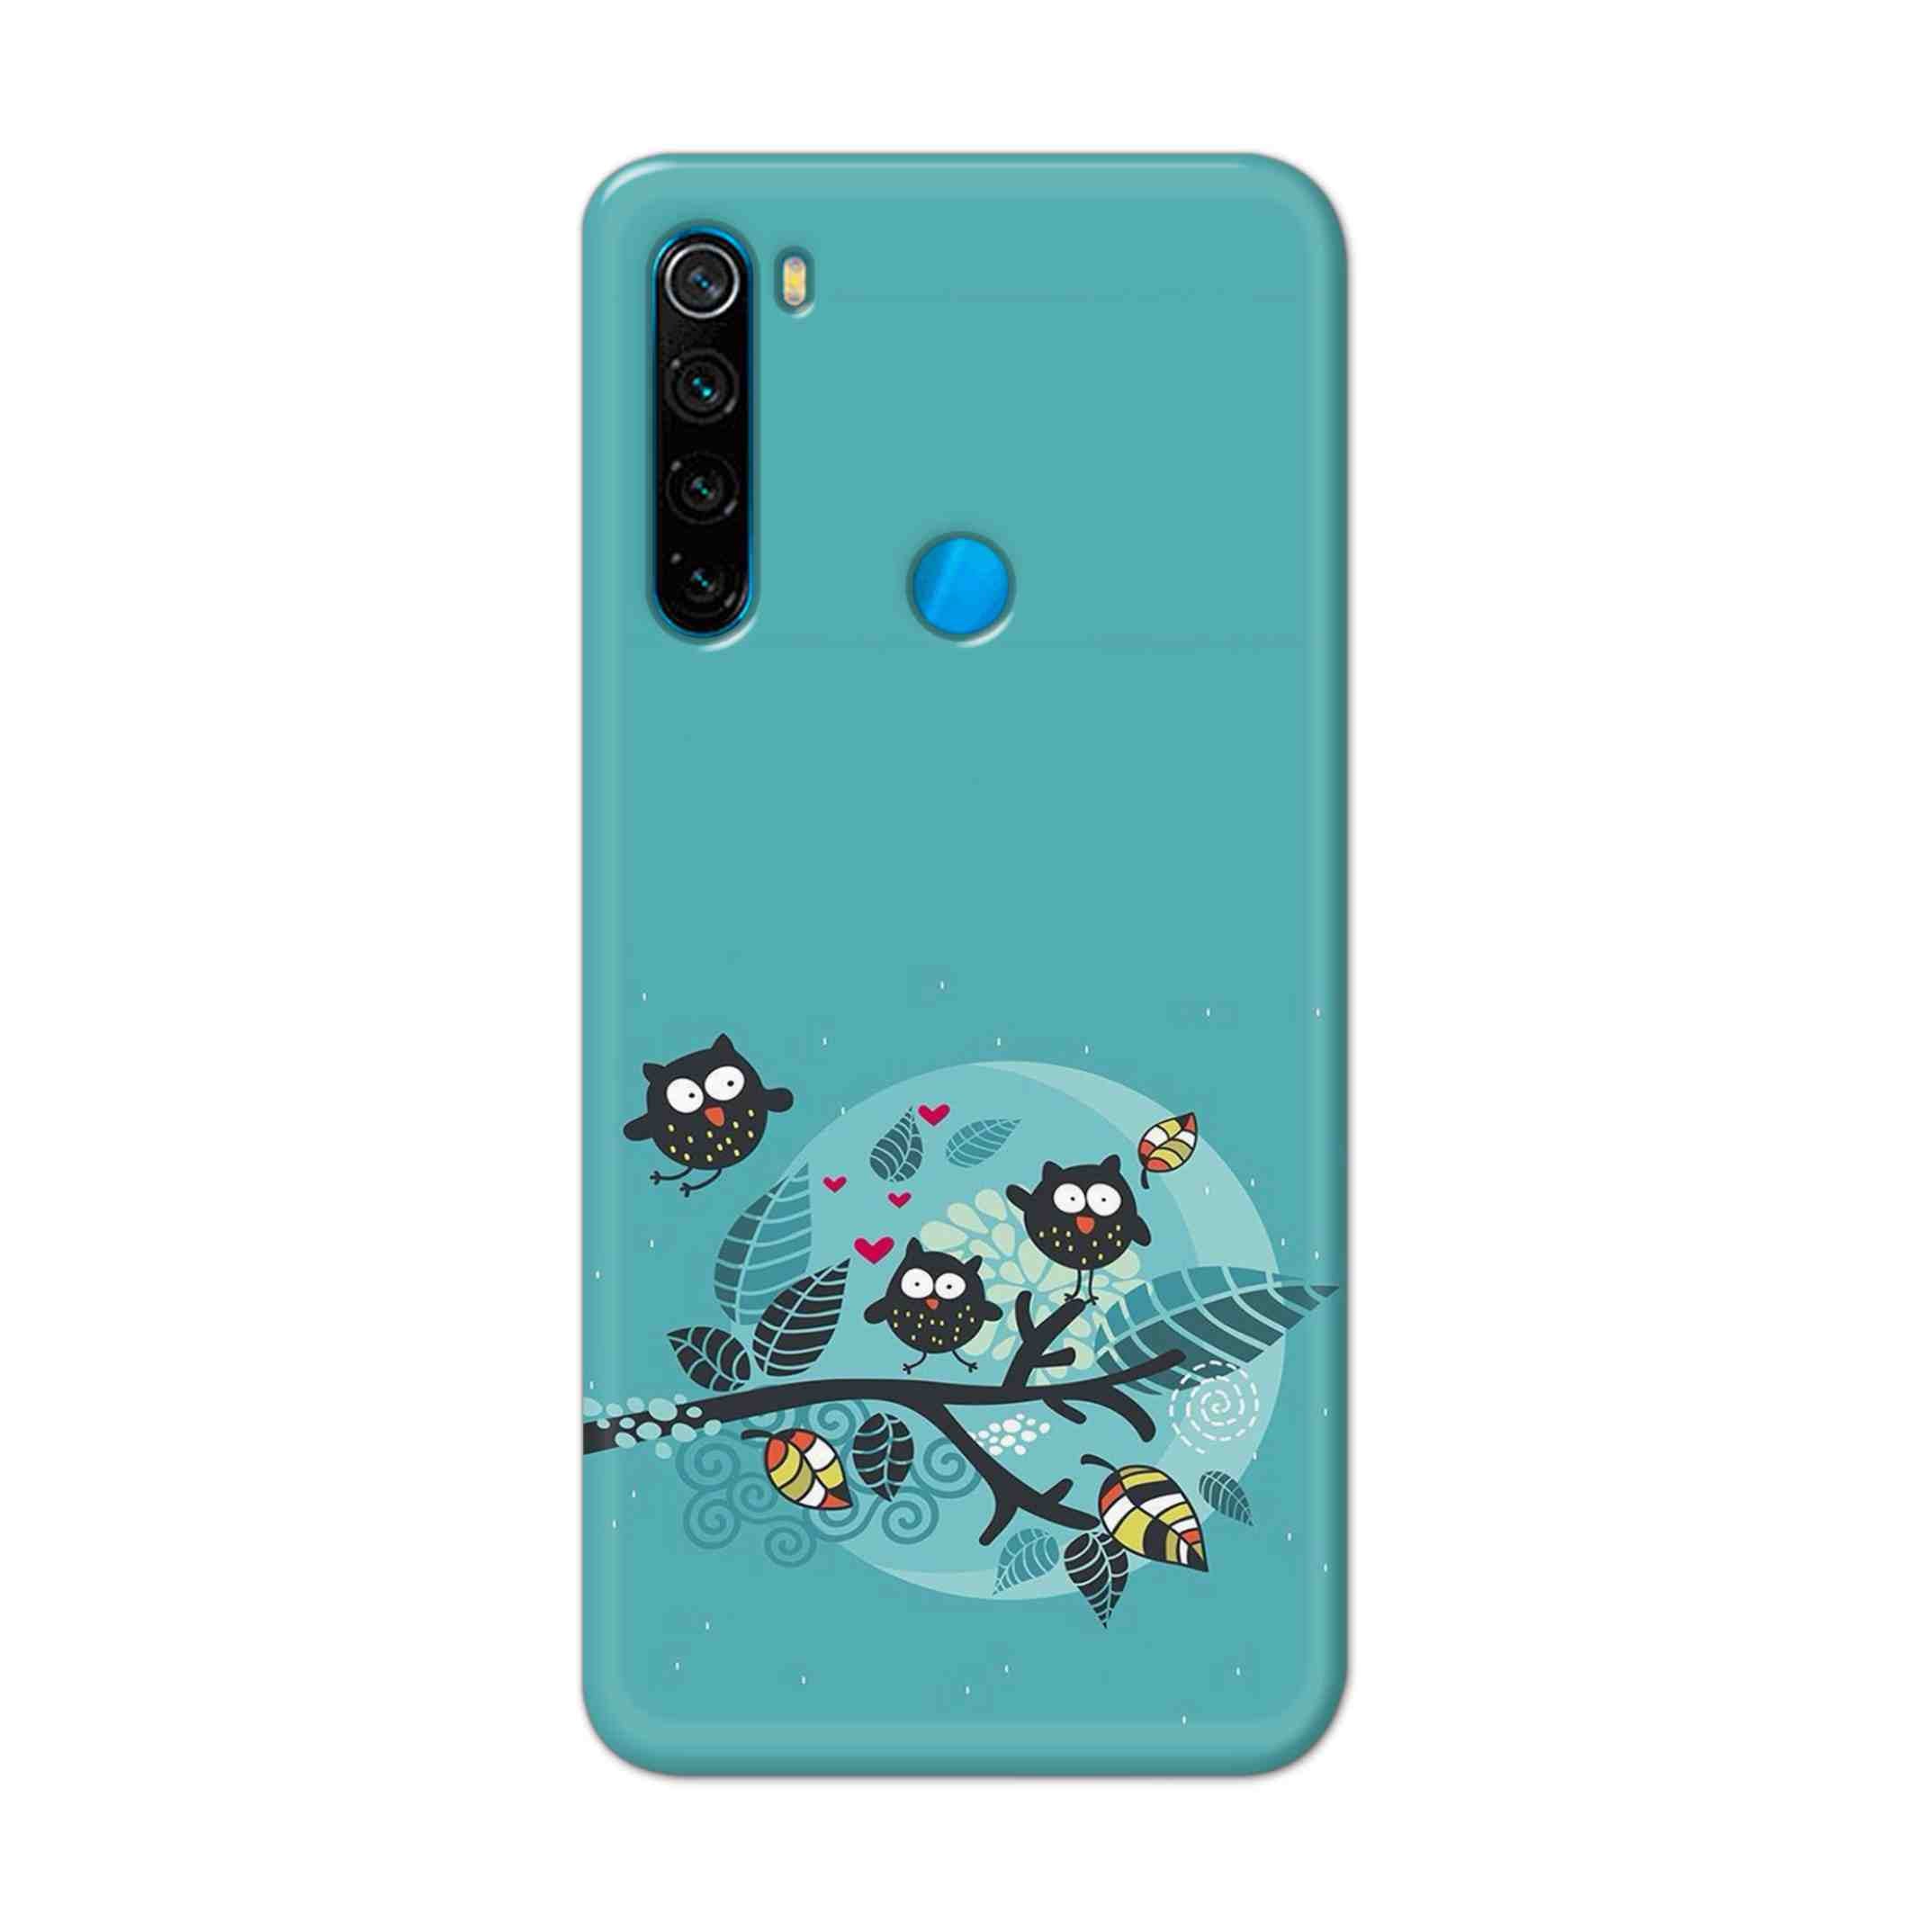 Buy Owl Hard Back Mobile Phone Case Cover For Xiaomi Redmi Note 8 Online